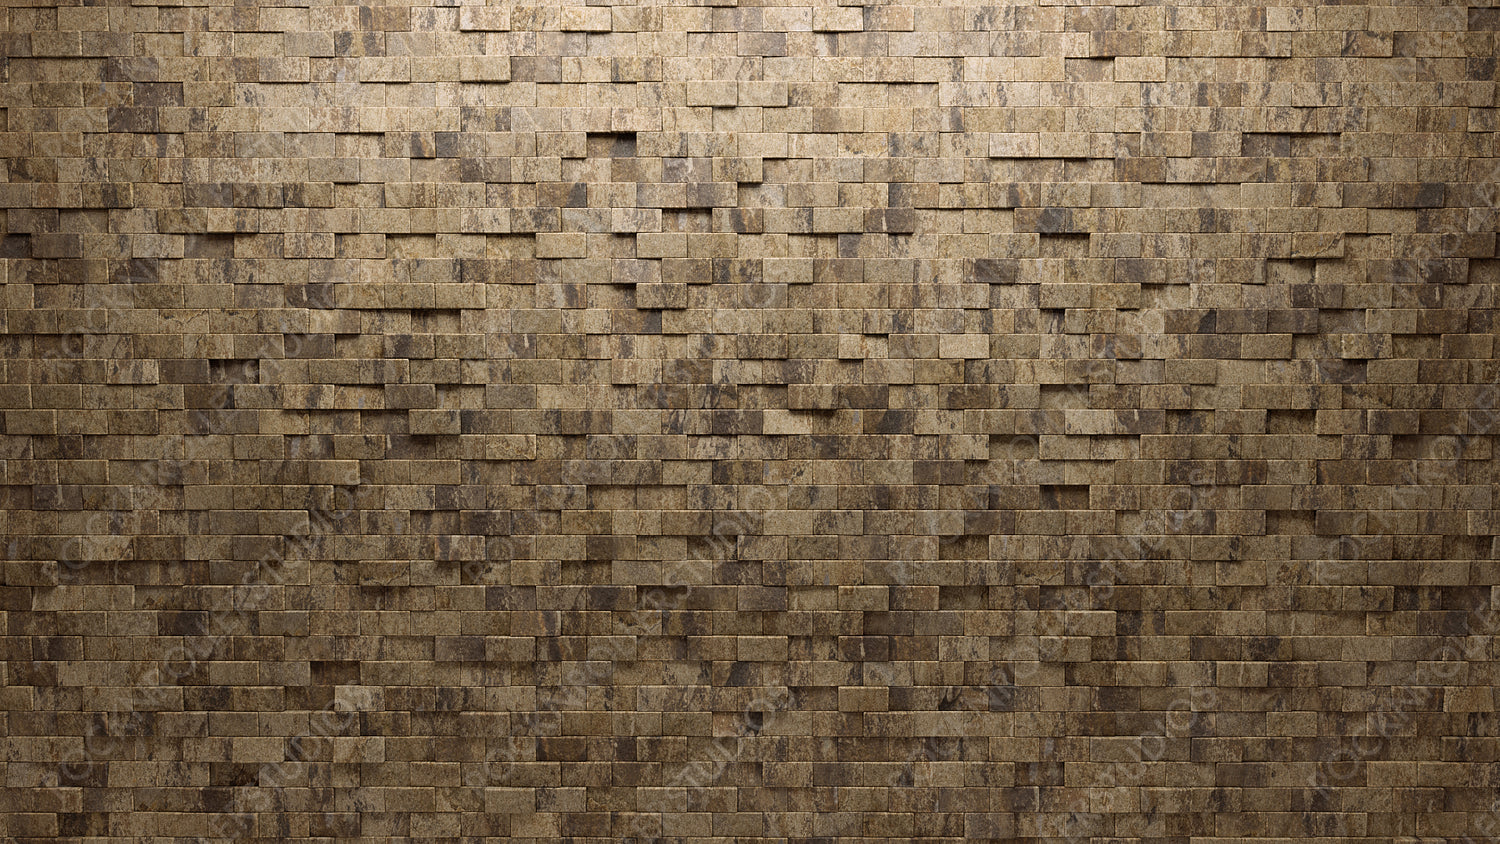 Polished, Textured Wall background with tiles. Rectangular, tile Wallpaper with Natural Stone, 3D blocks. 3D Render